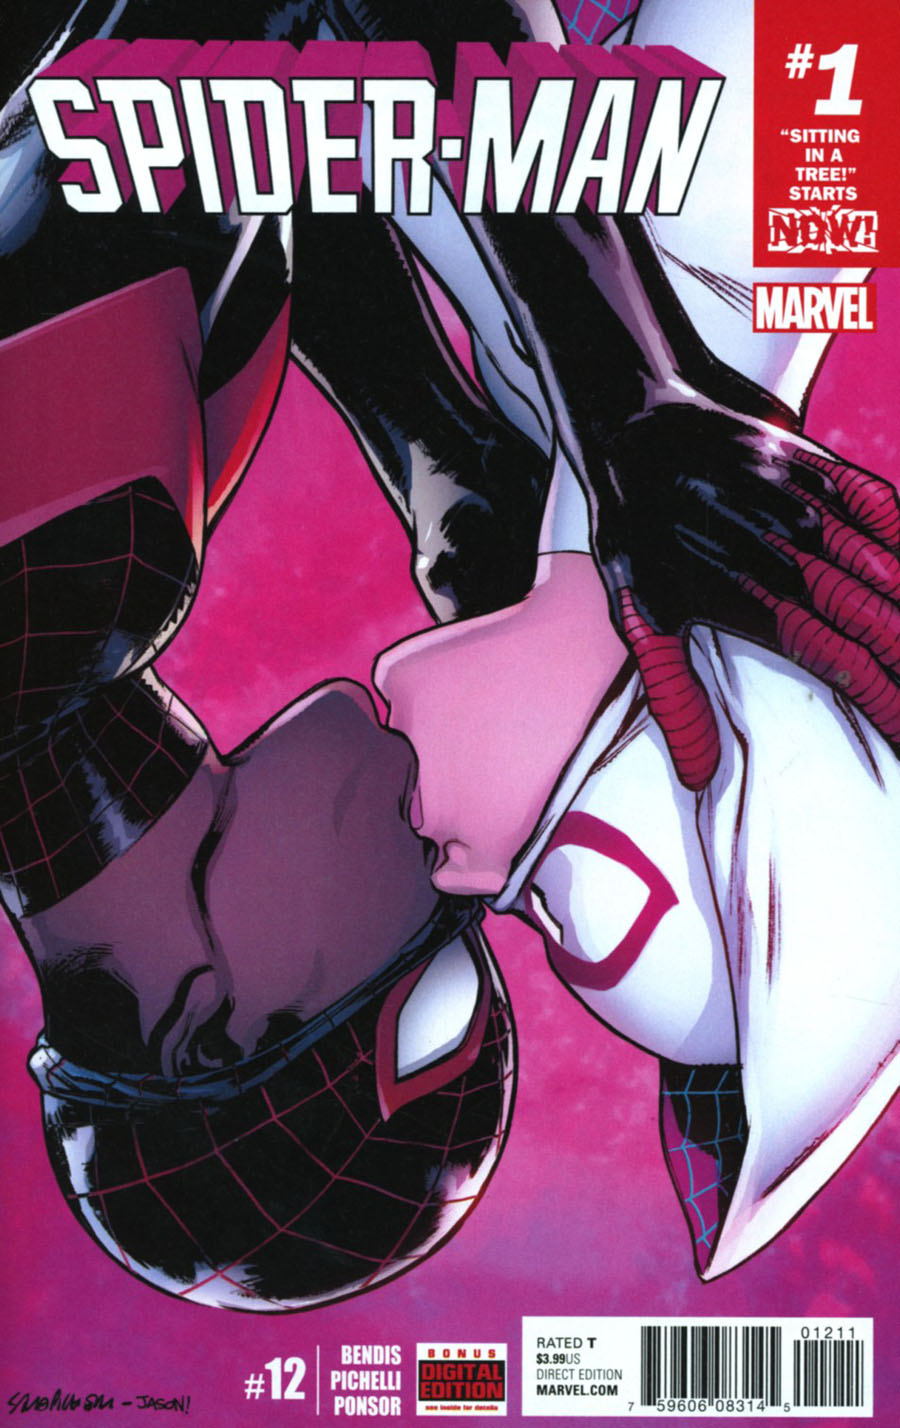 Spider-Man Vol 2 #12 Cover A Regular Sara Pichelli Cover (Sitting In A Tree Part 1)